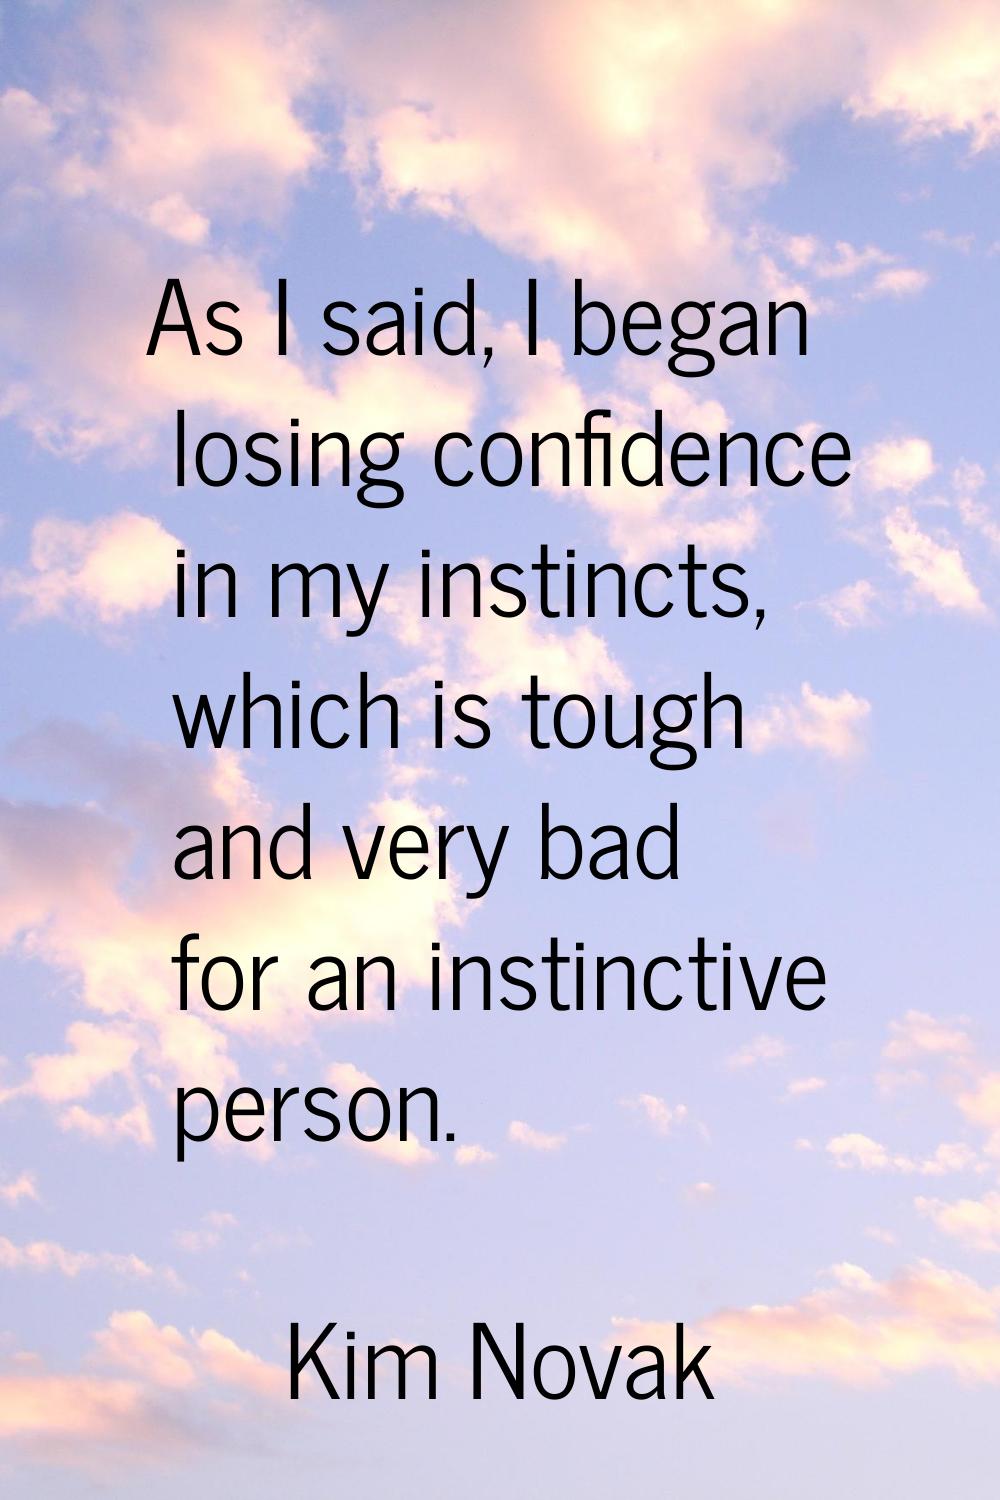 As I said, I began losing confidence in my instincts, which is tough and very bad for an instinctiv